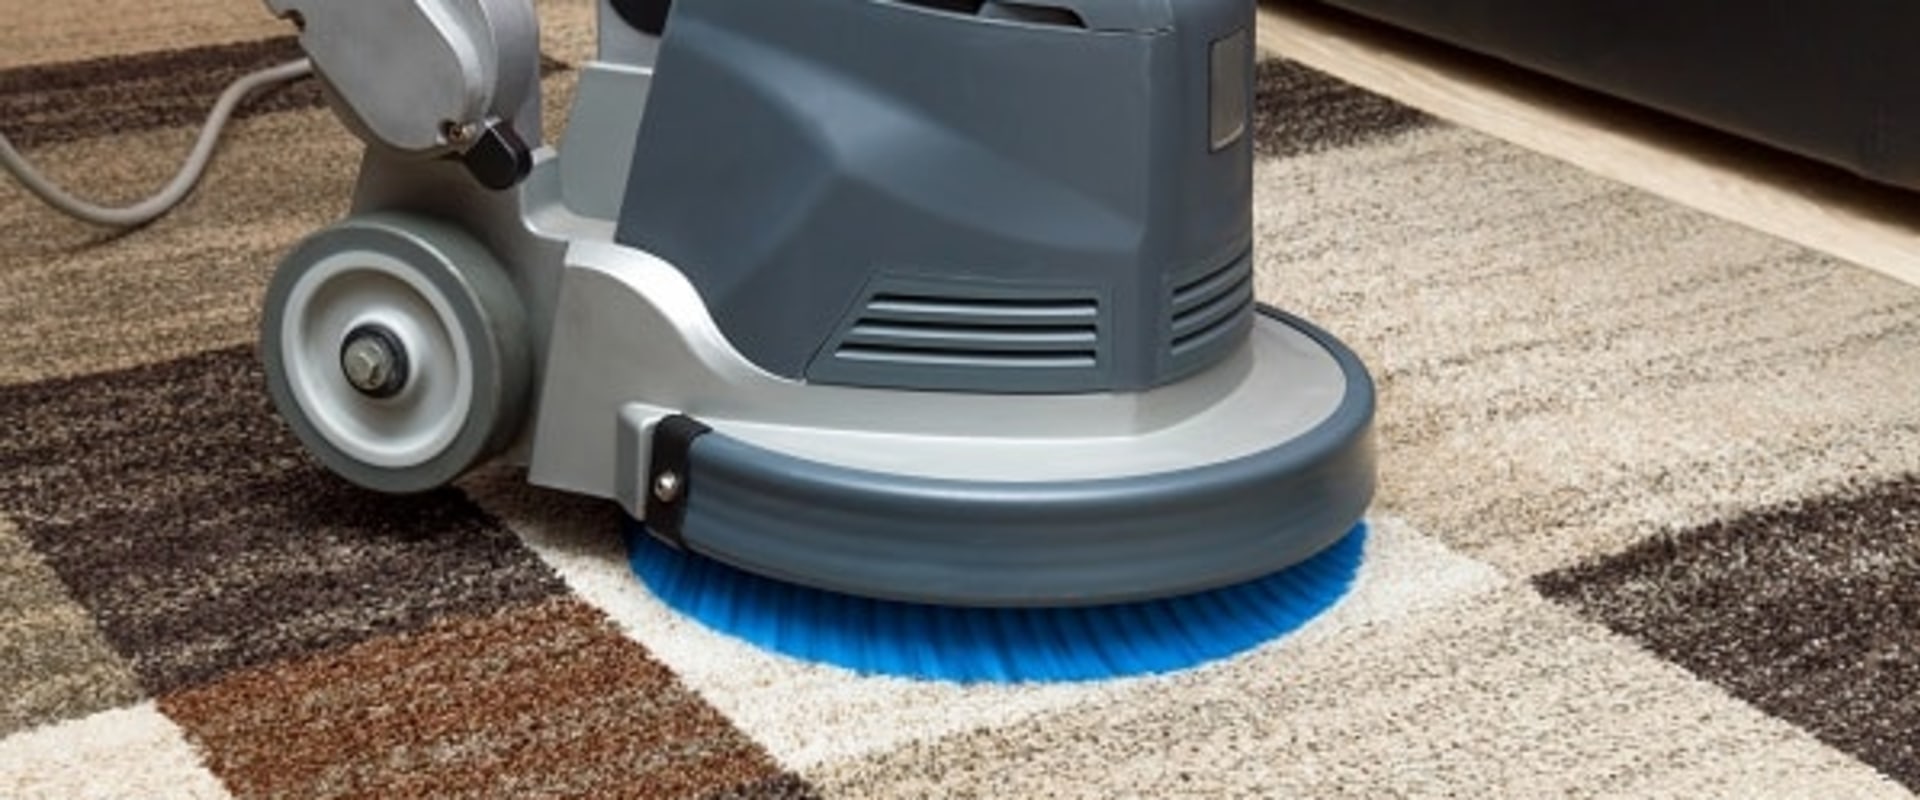 Where to rent commercial carpet cleaner?